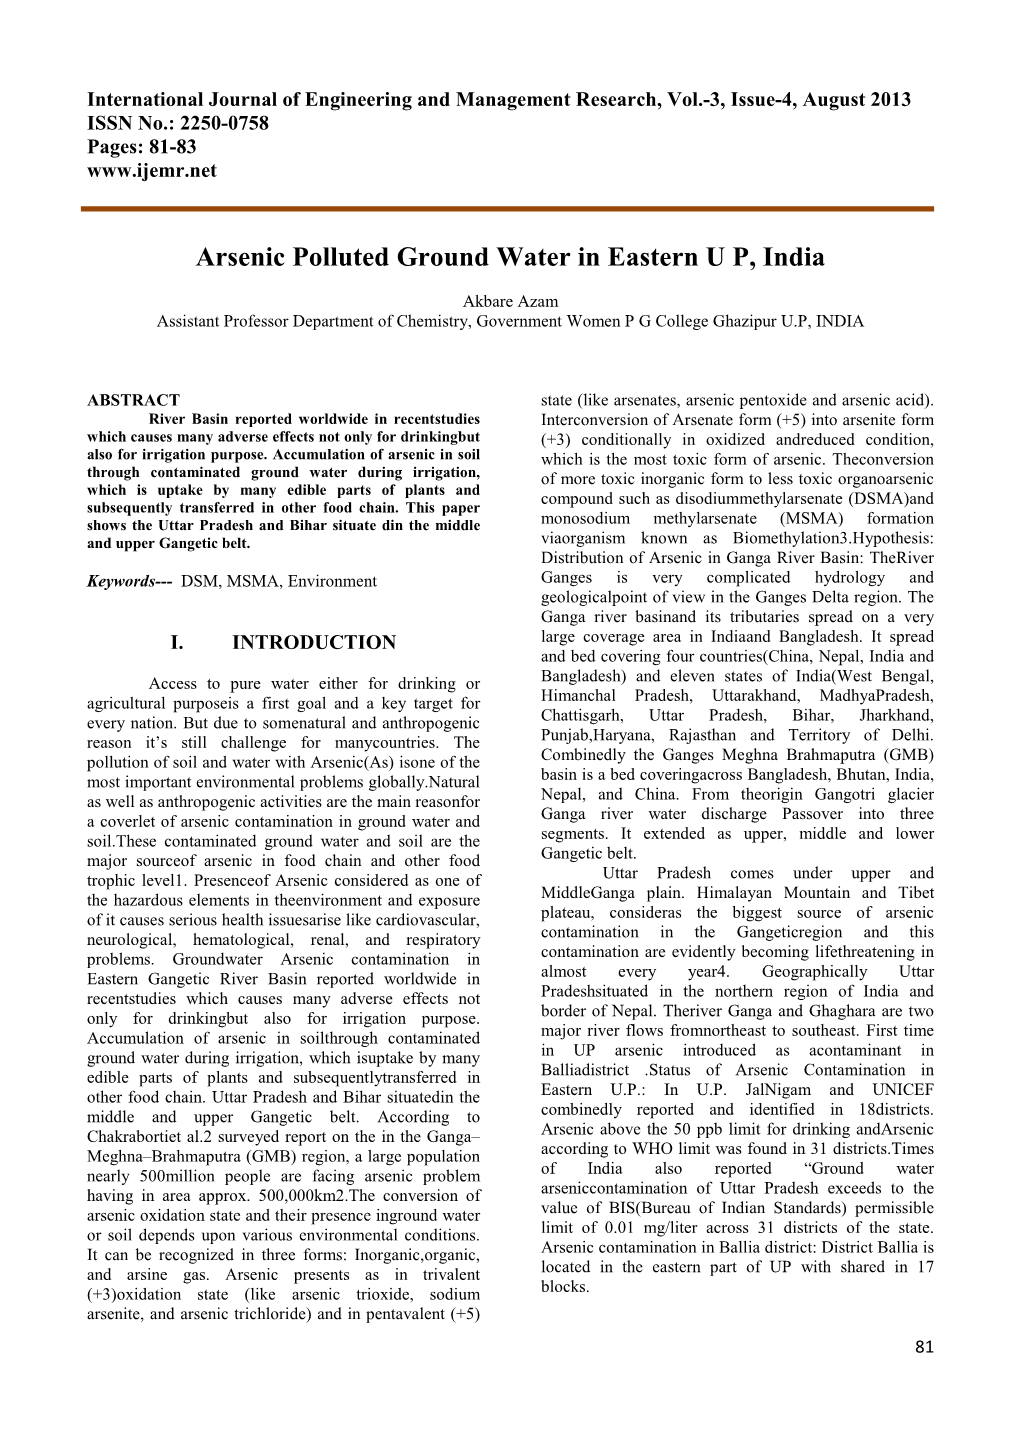 Arsenic Polluted Ground Water in Eastern U P, India